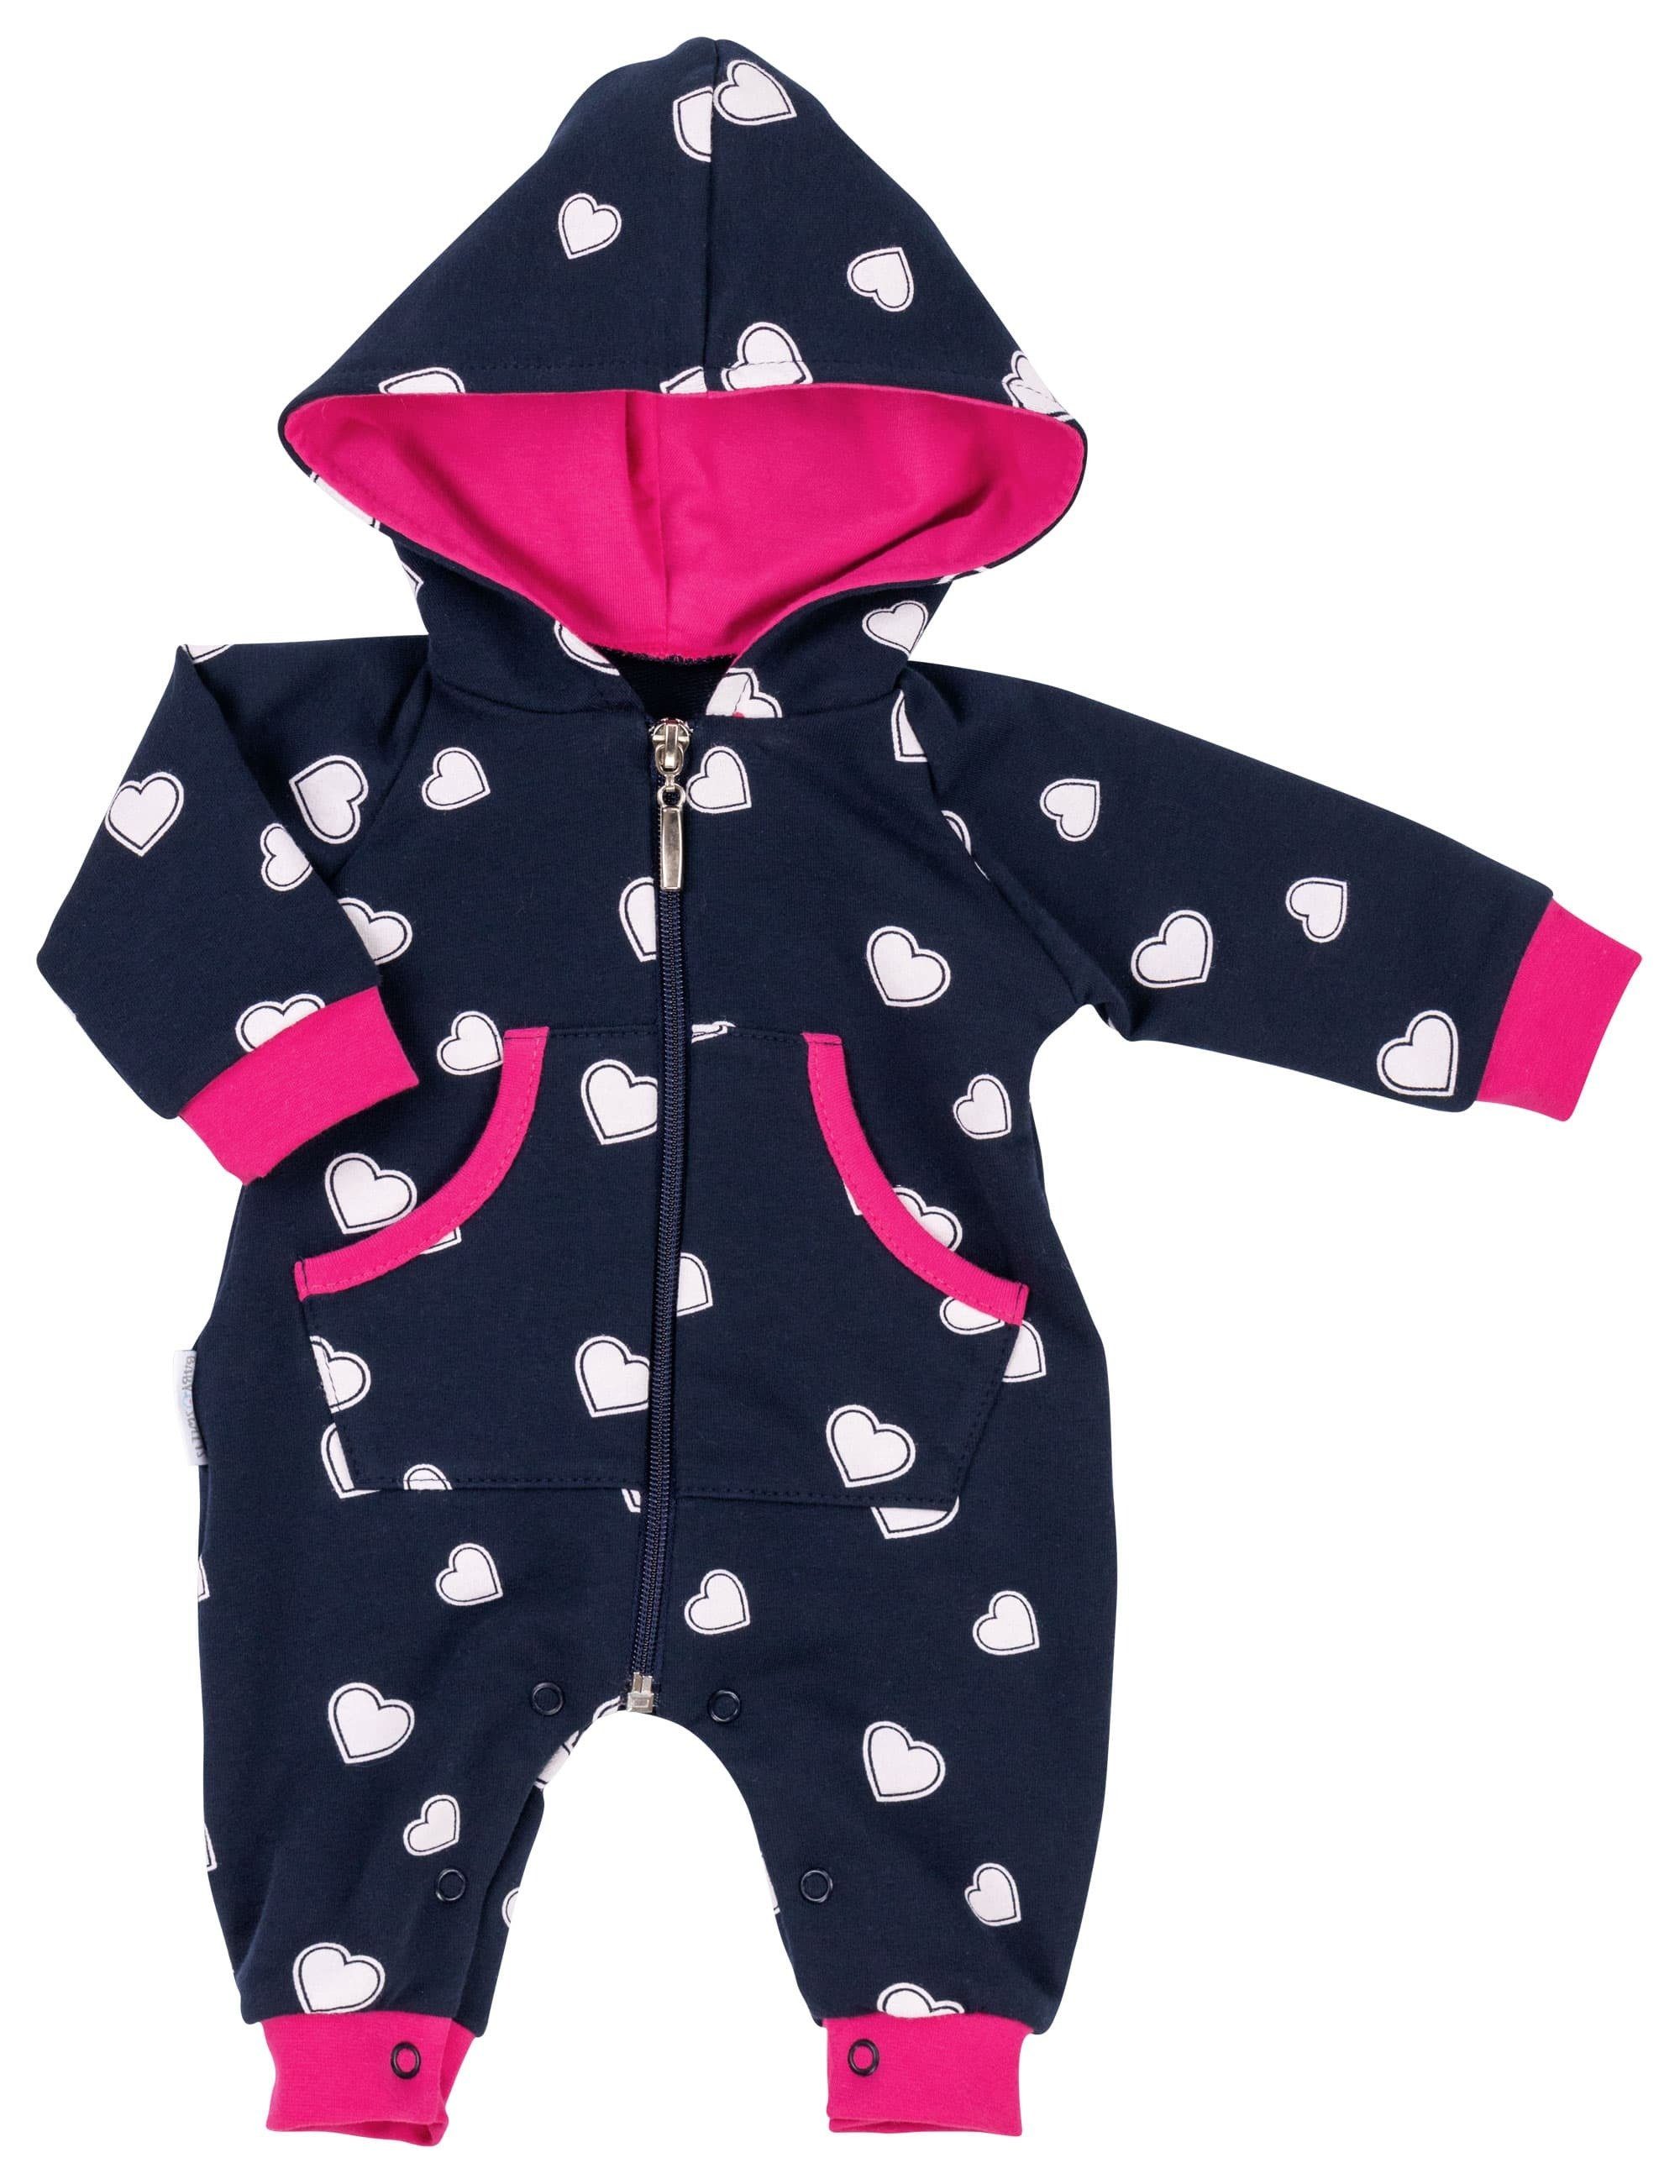 Baby Sweets Strampler, Overall Herz dunkelblau (1-tlg) pink Overall